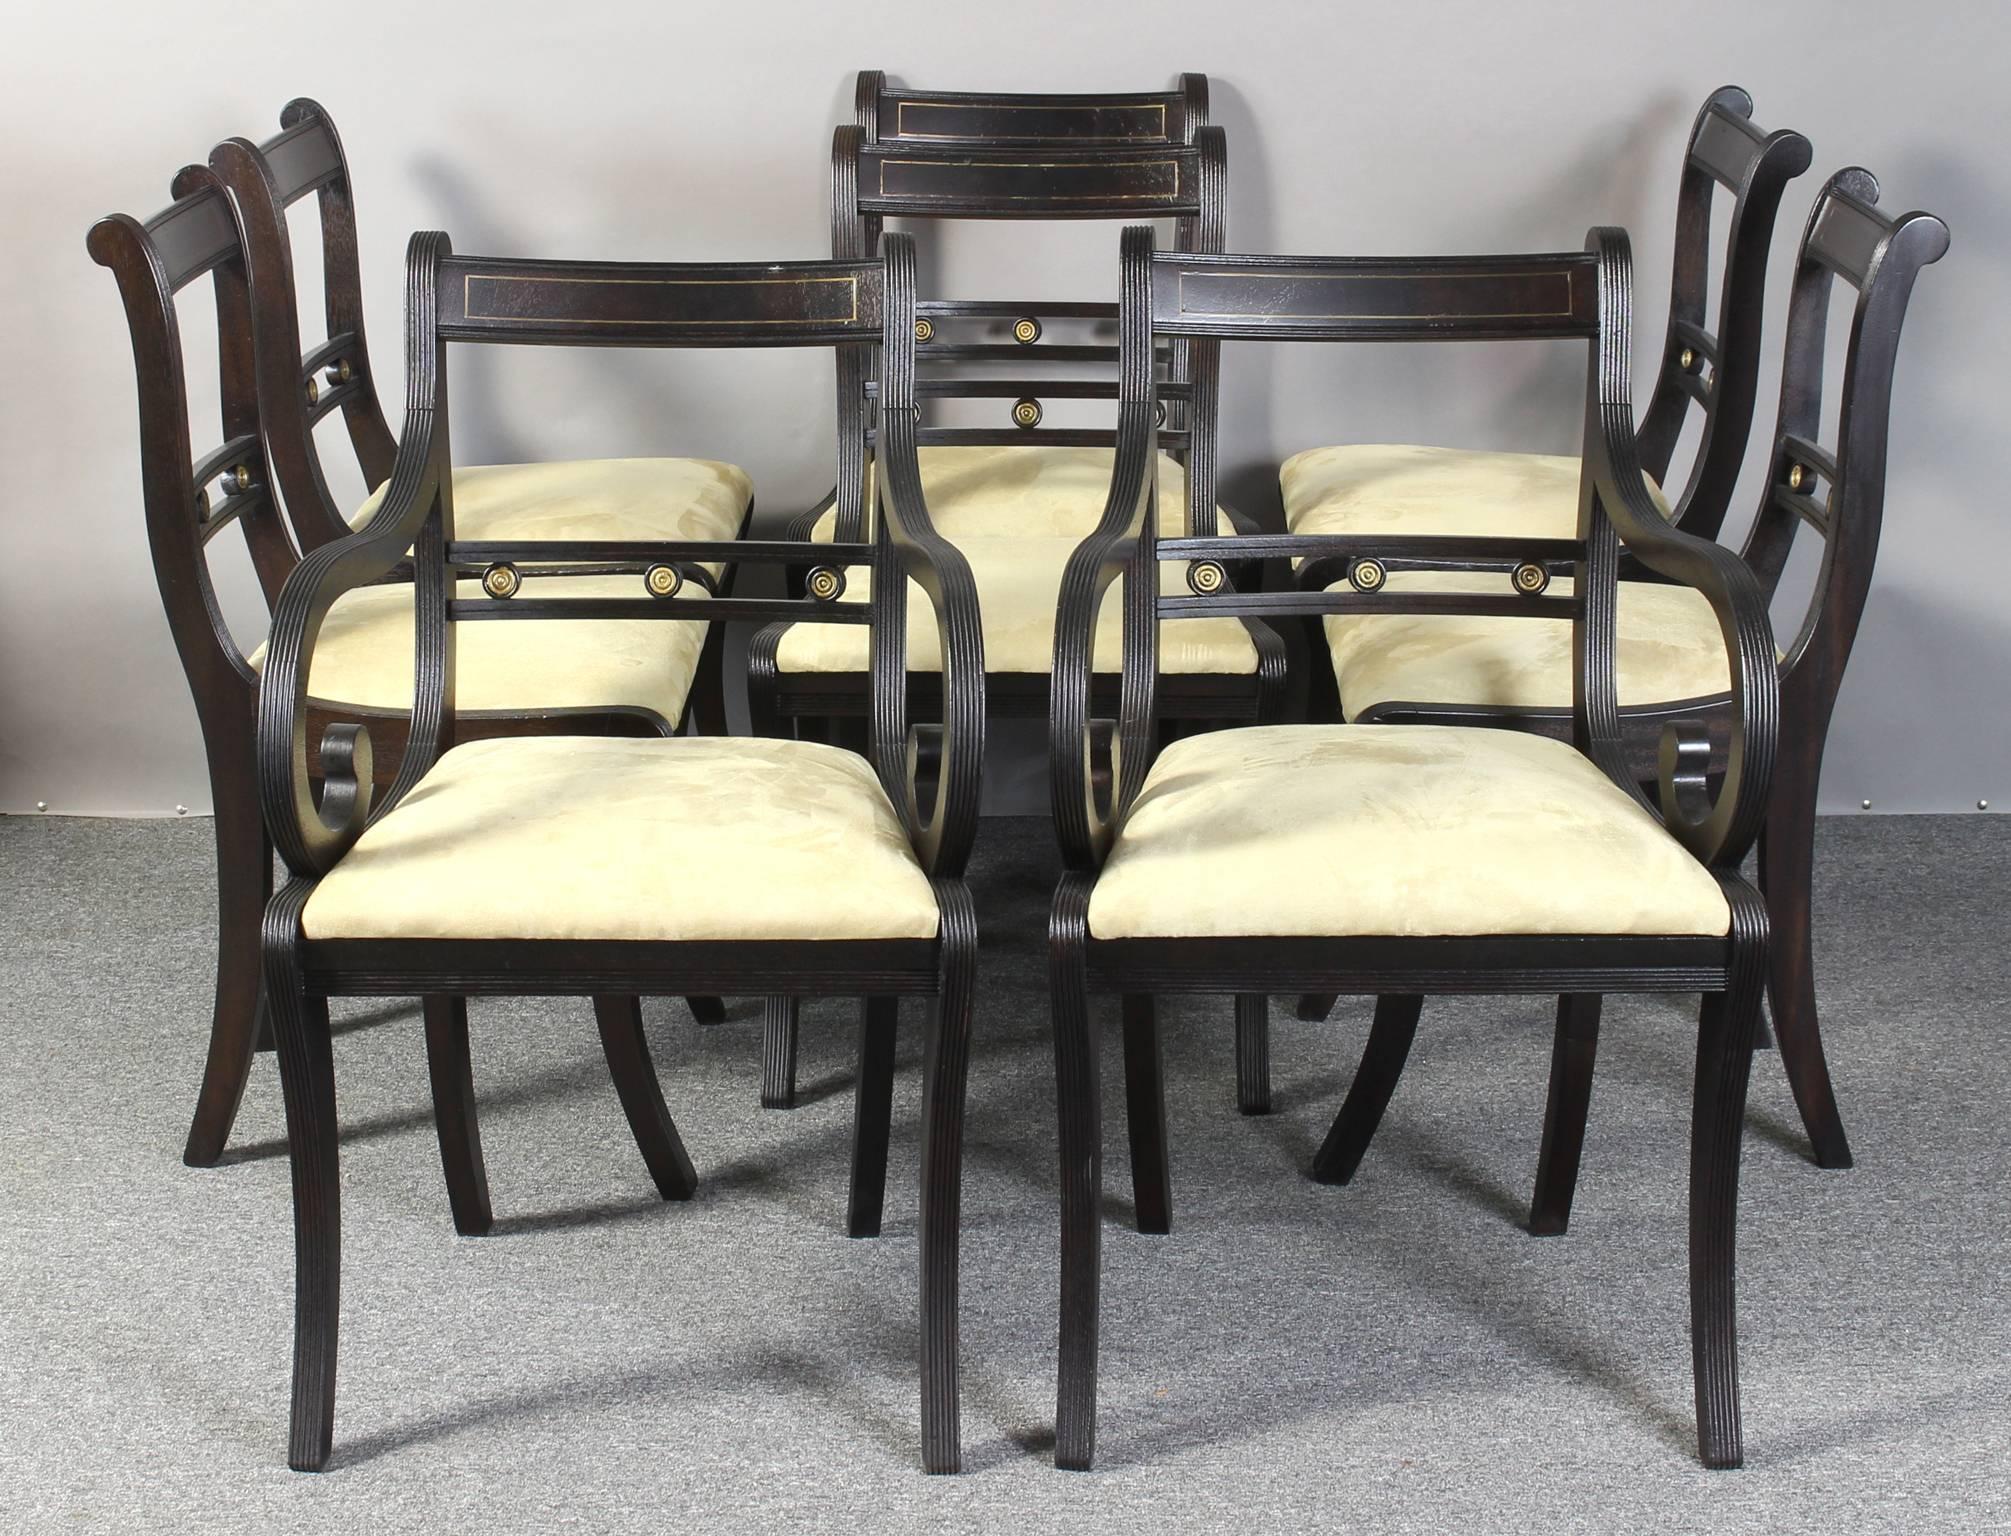 A set of eight solid mahogany Regency style dining chairs comprising two arms and six sides. The chairs, inset with brass accents, have a hand-rubbed ebony finish allowing the rich mahogany grain to show through. With reeded saber legs and slip